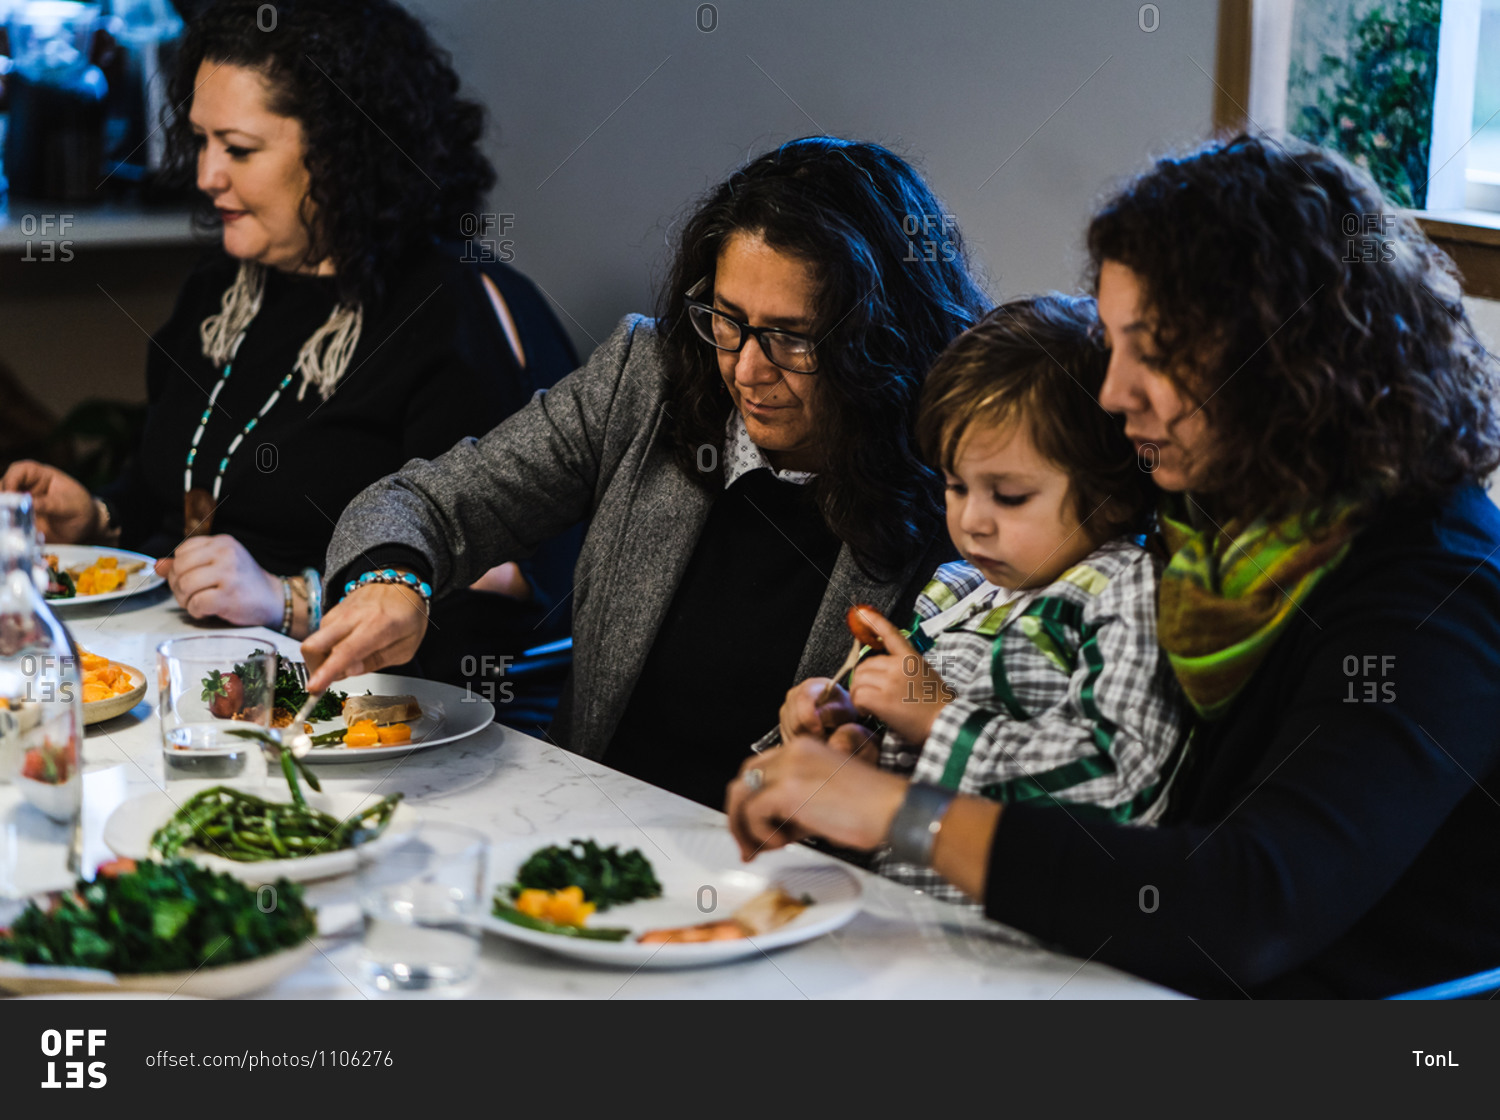 Horizontal shot of seated native american women dishing out food at a family meal